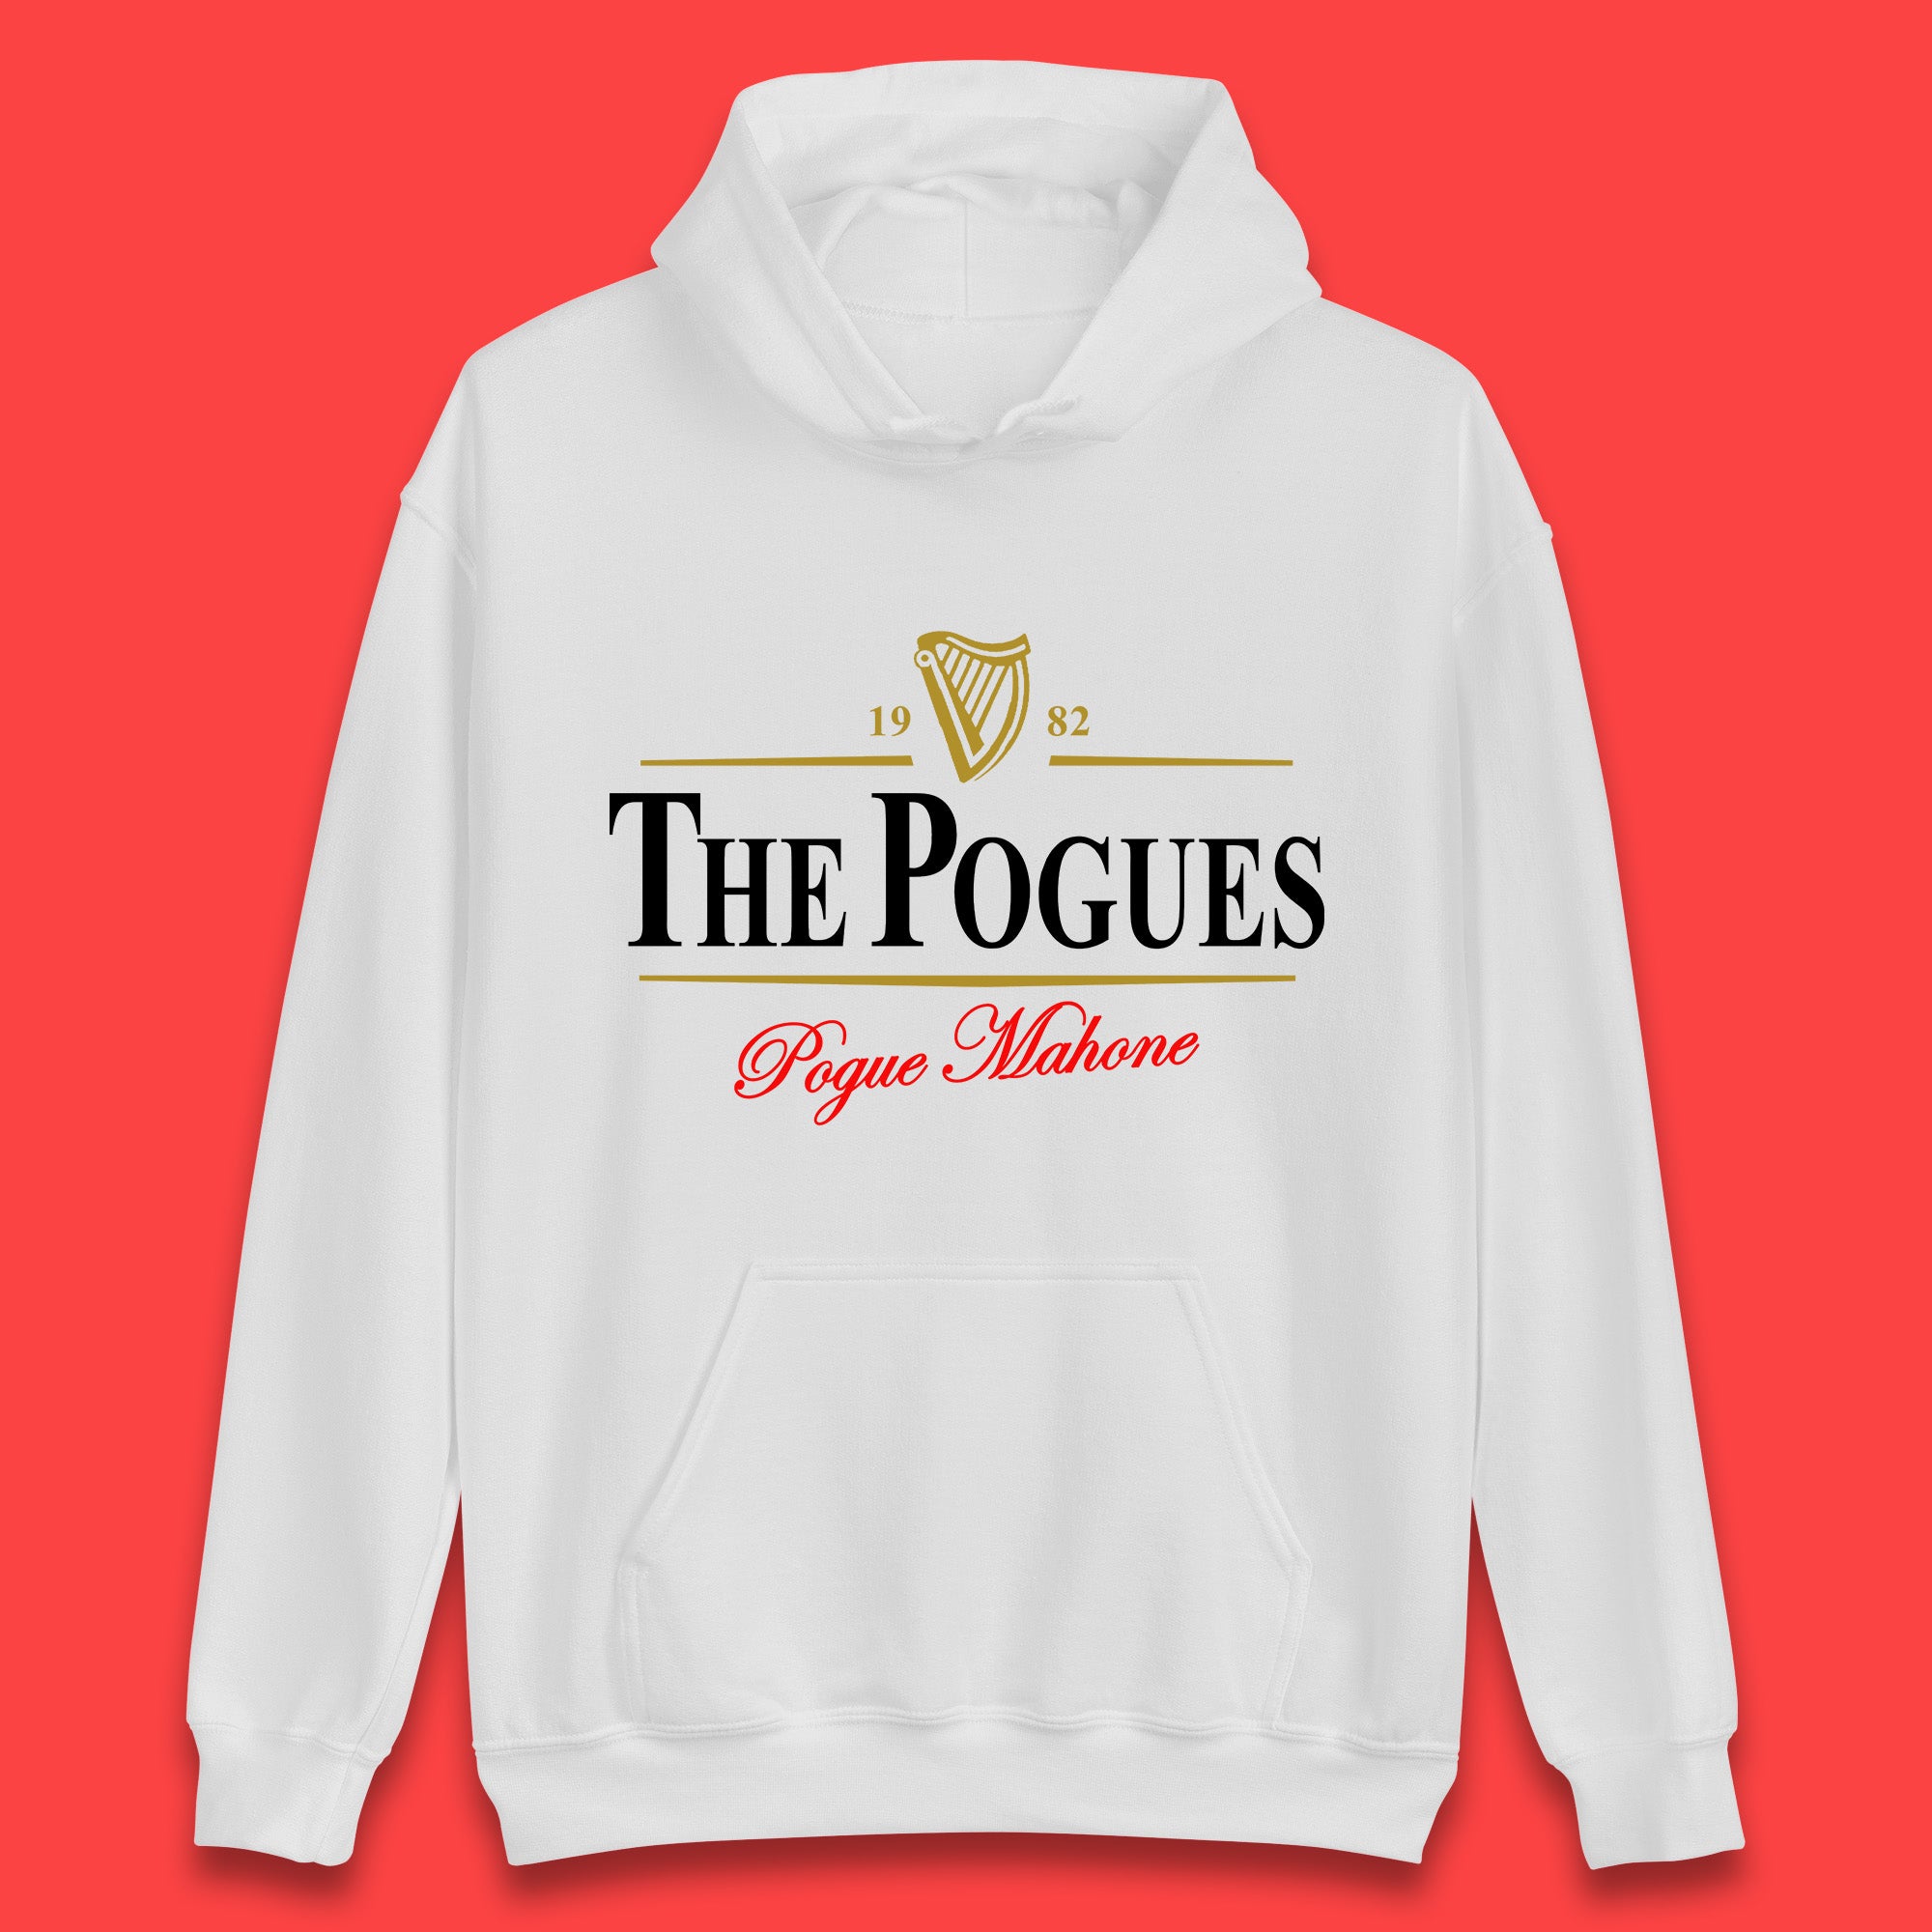 The Pogues Hoodie